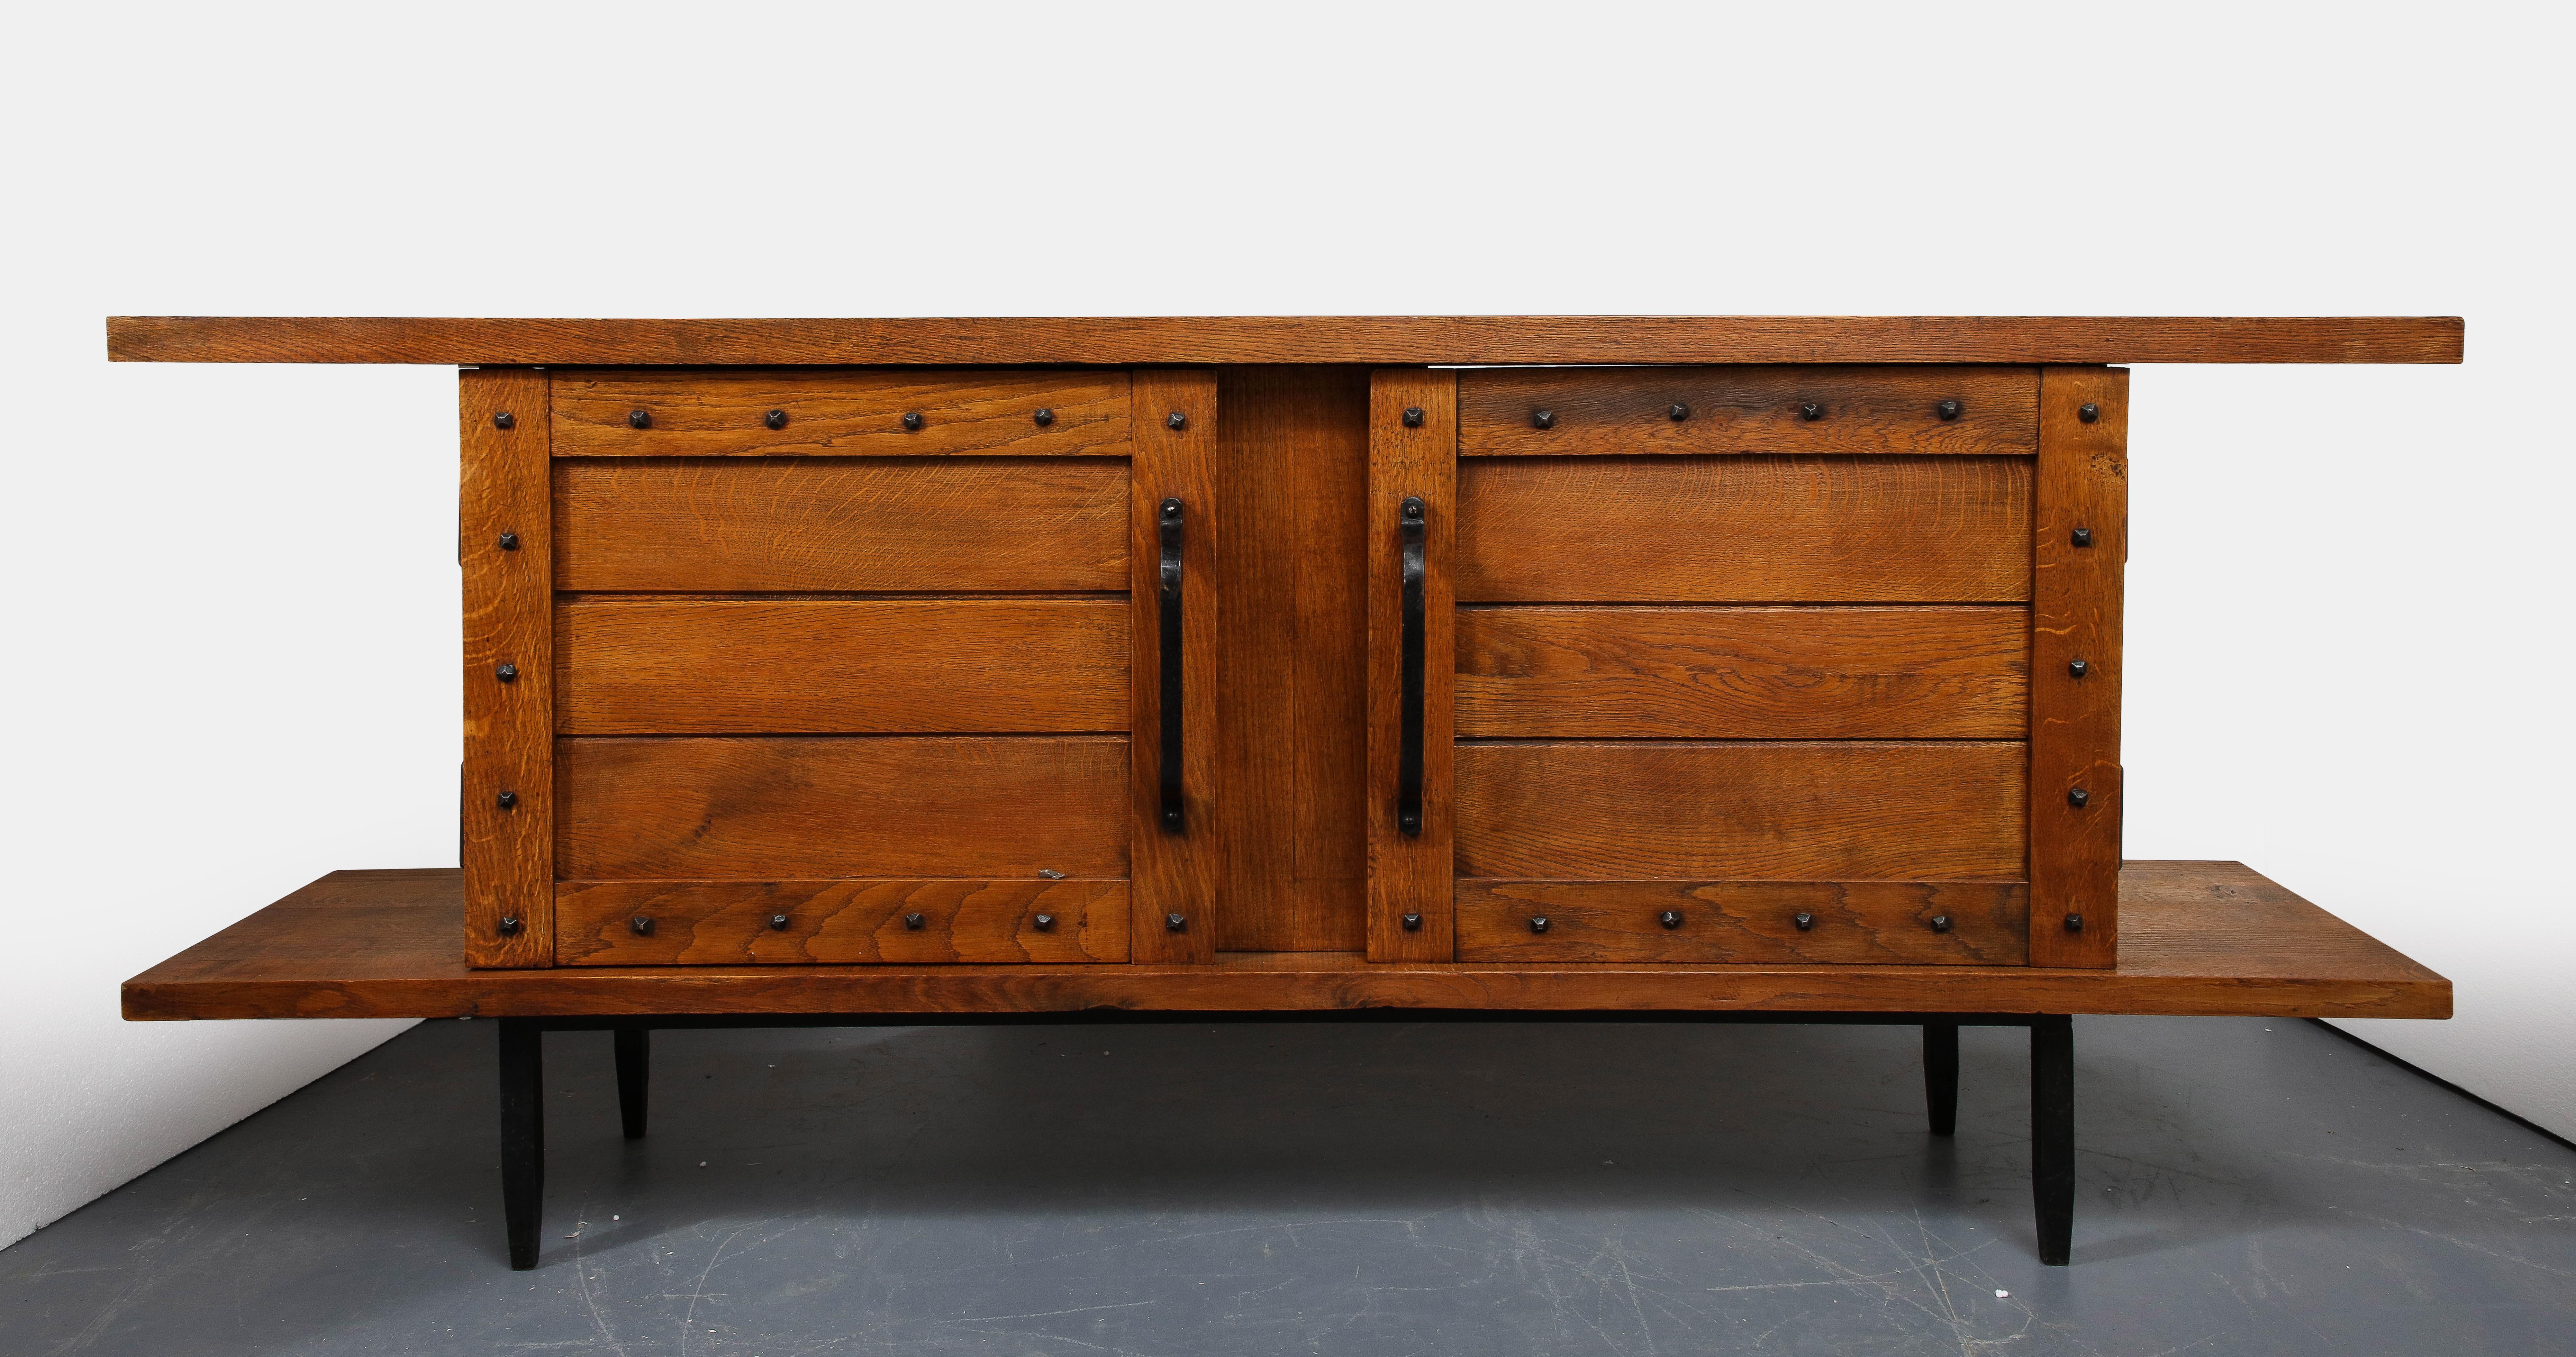 Wrought Iron Oak and Iron Sideboard by the Artisans of Les Marolles, France, Mid-20th Century